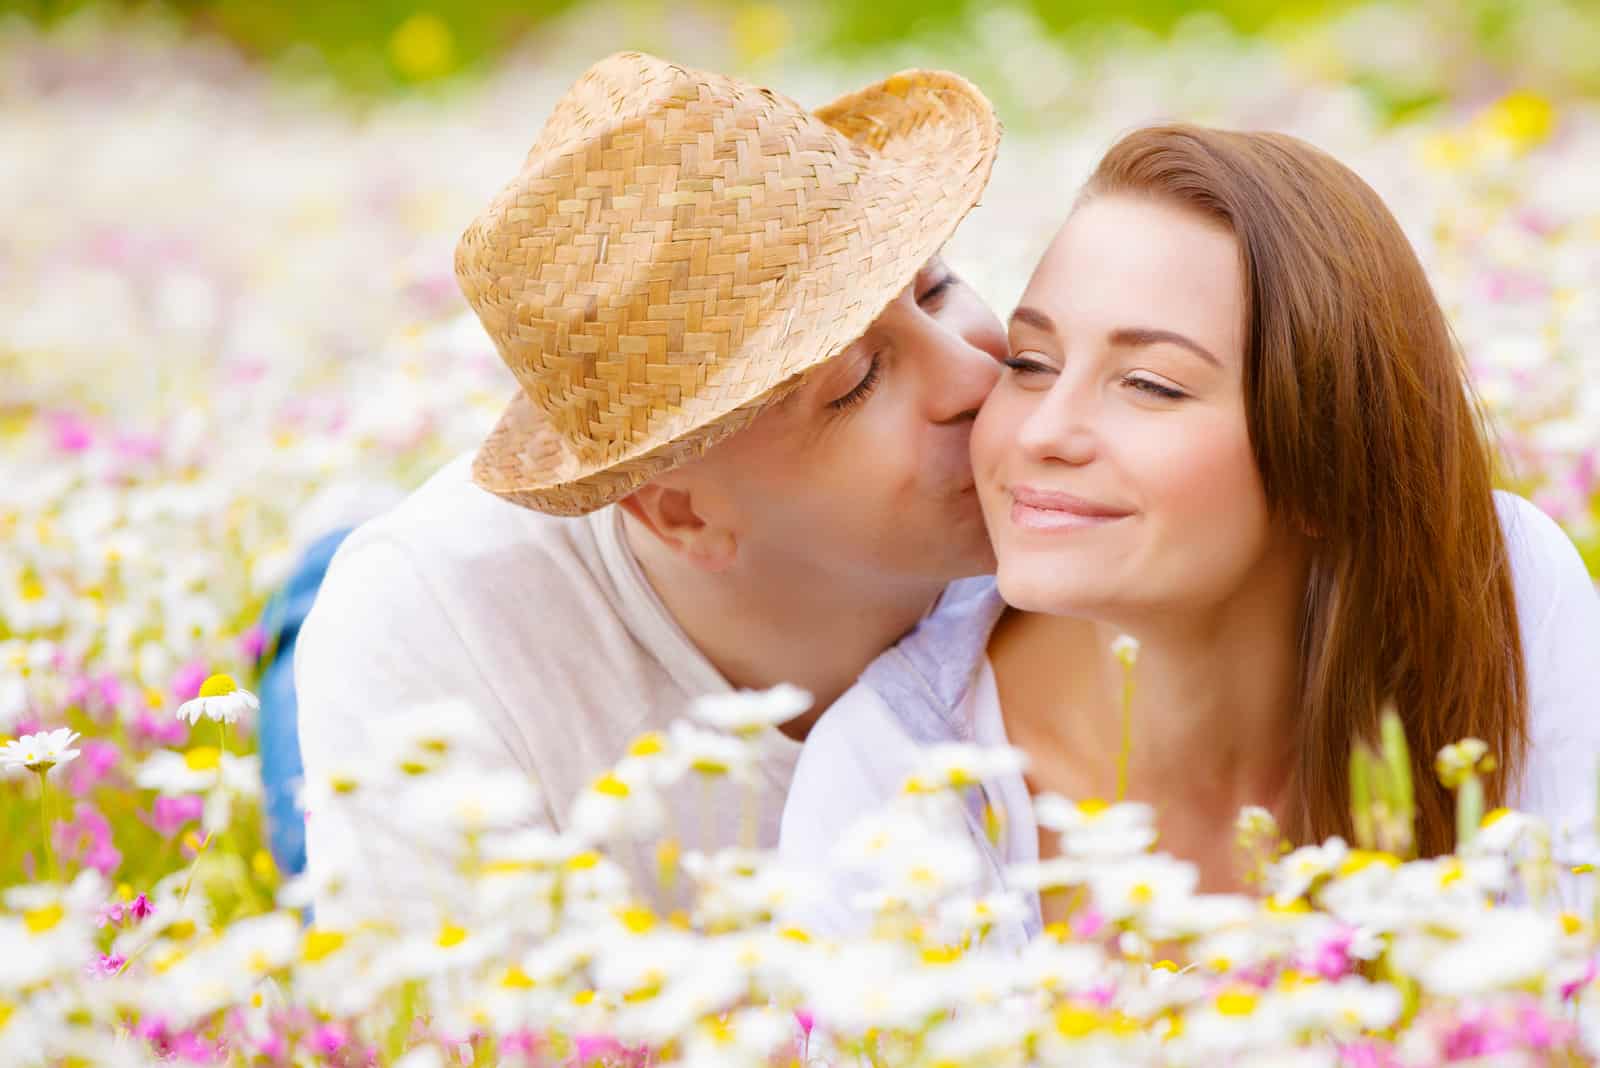 a man kisses a woman on the cheek as they lie in flowers